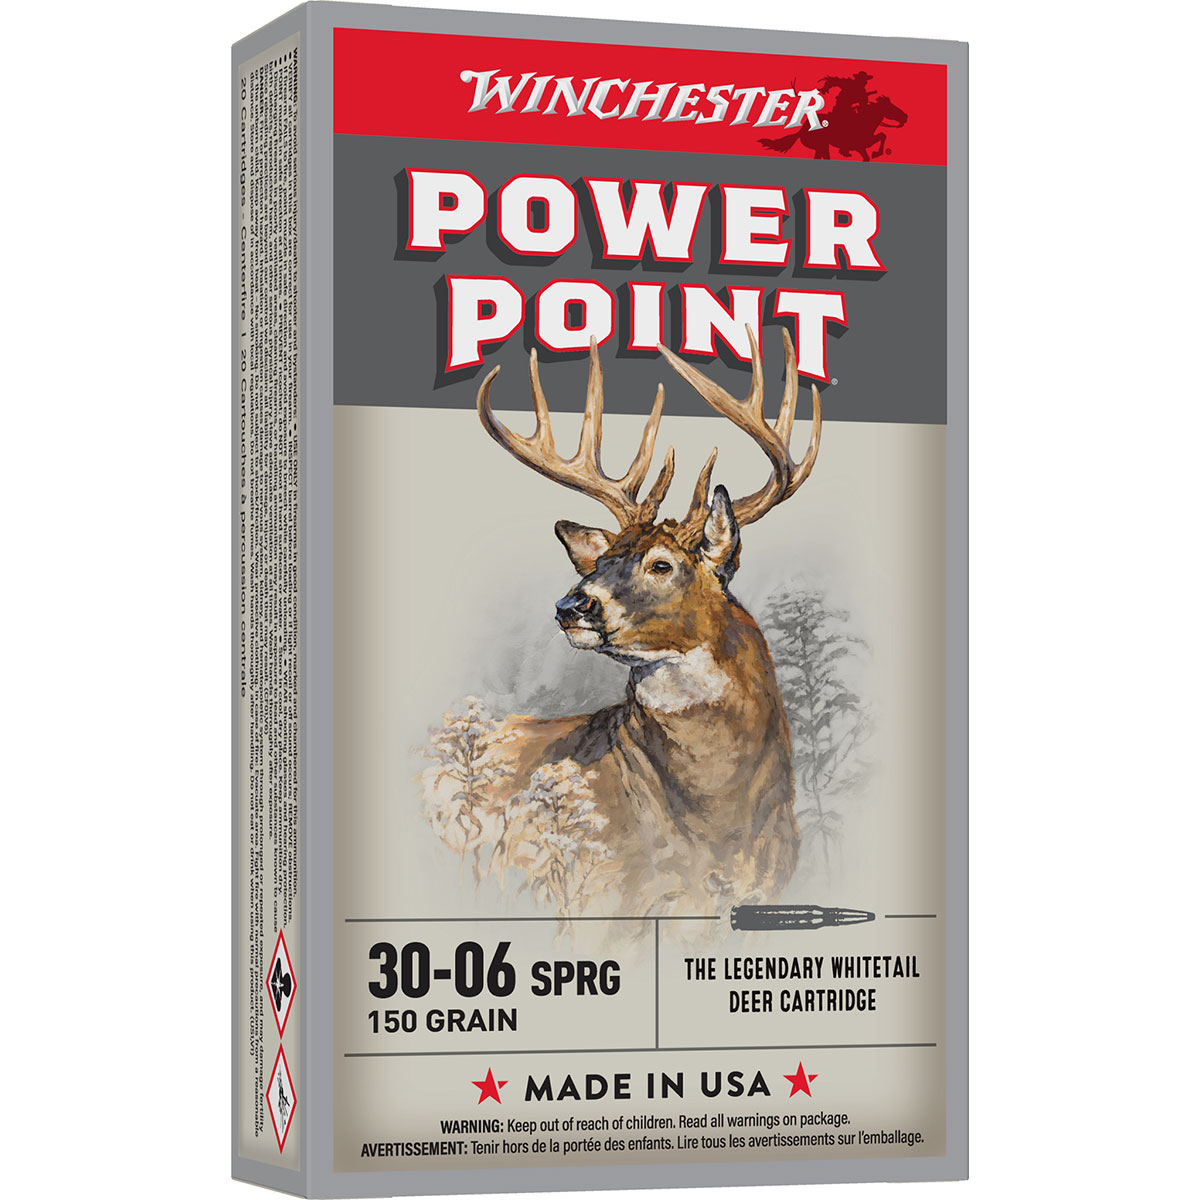 WINCHESTER - POWER POINT 30-06 SPRINGFIELD RIFLE AMMO